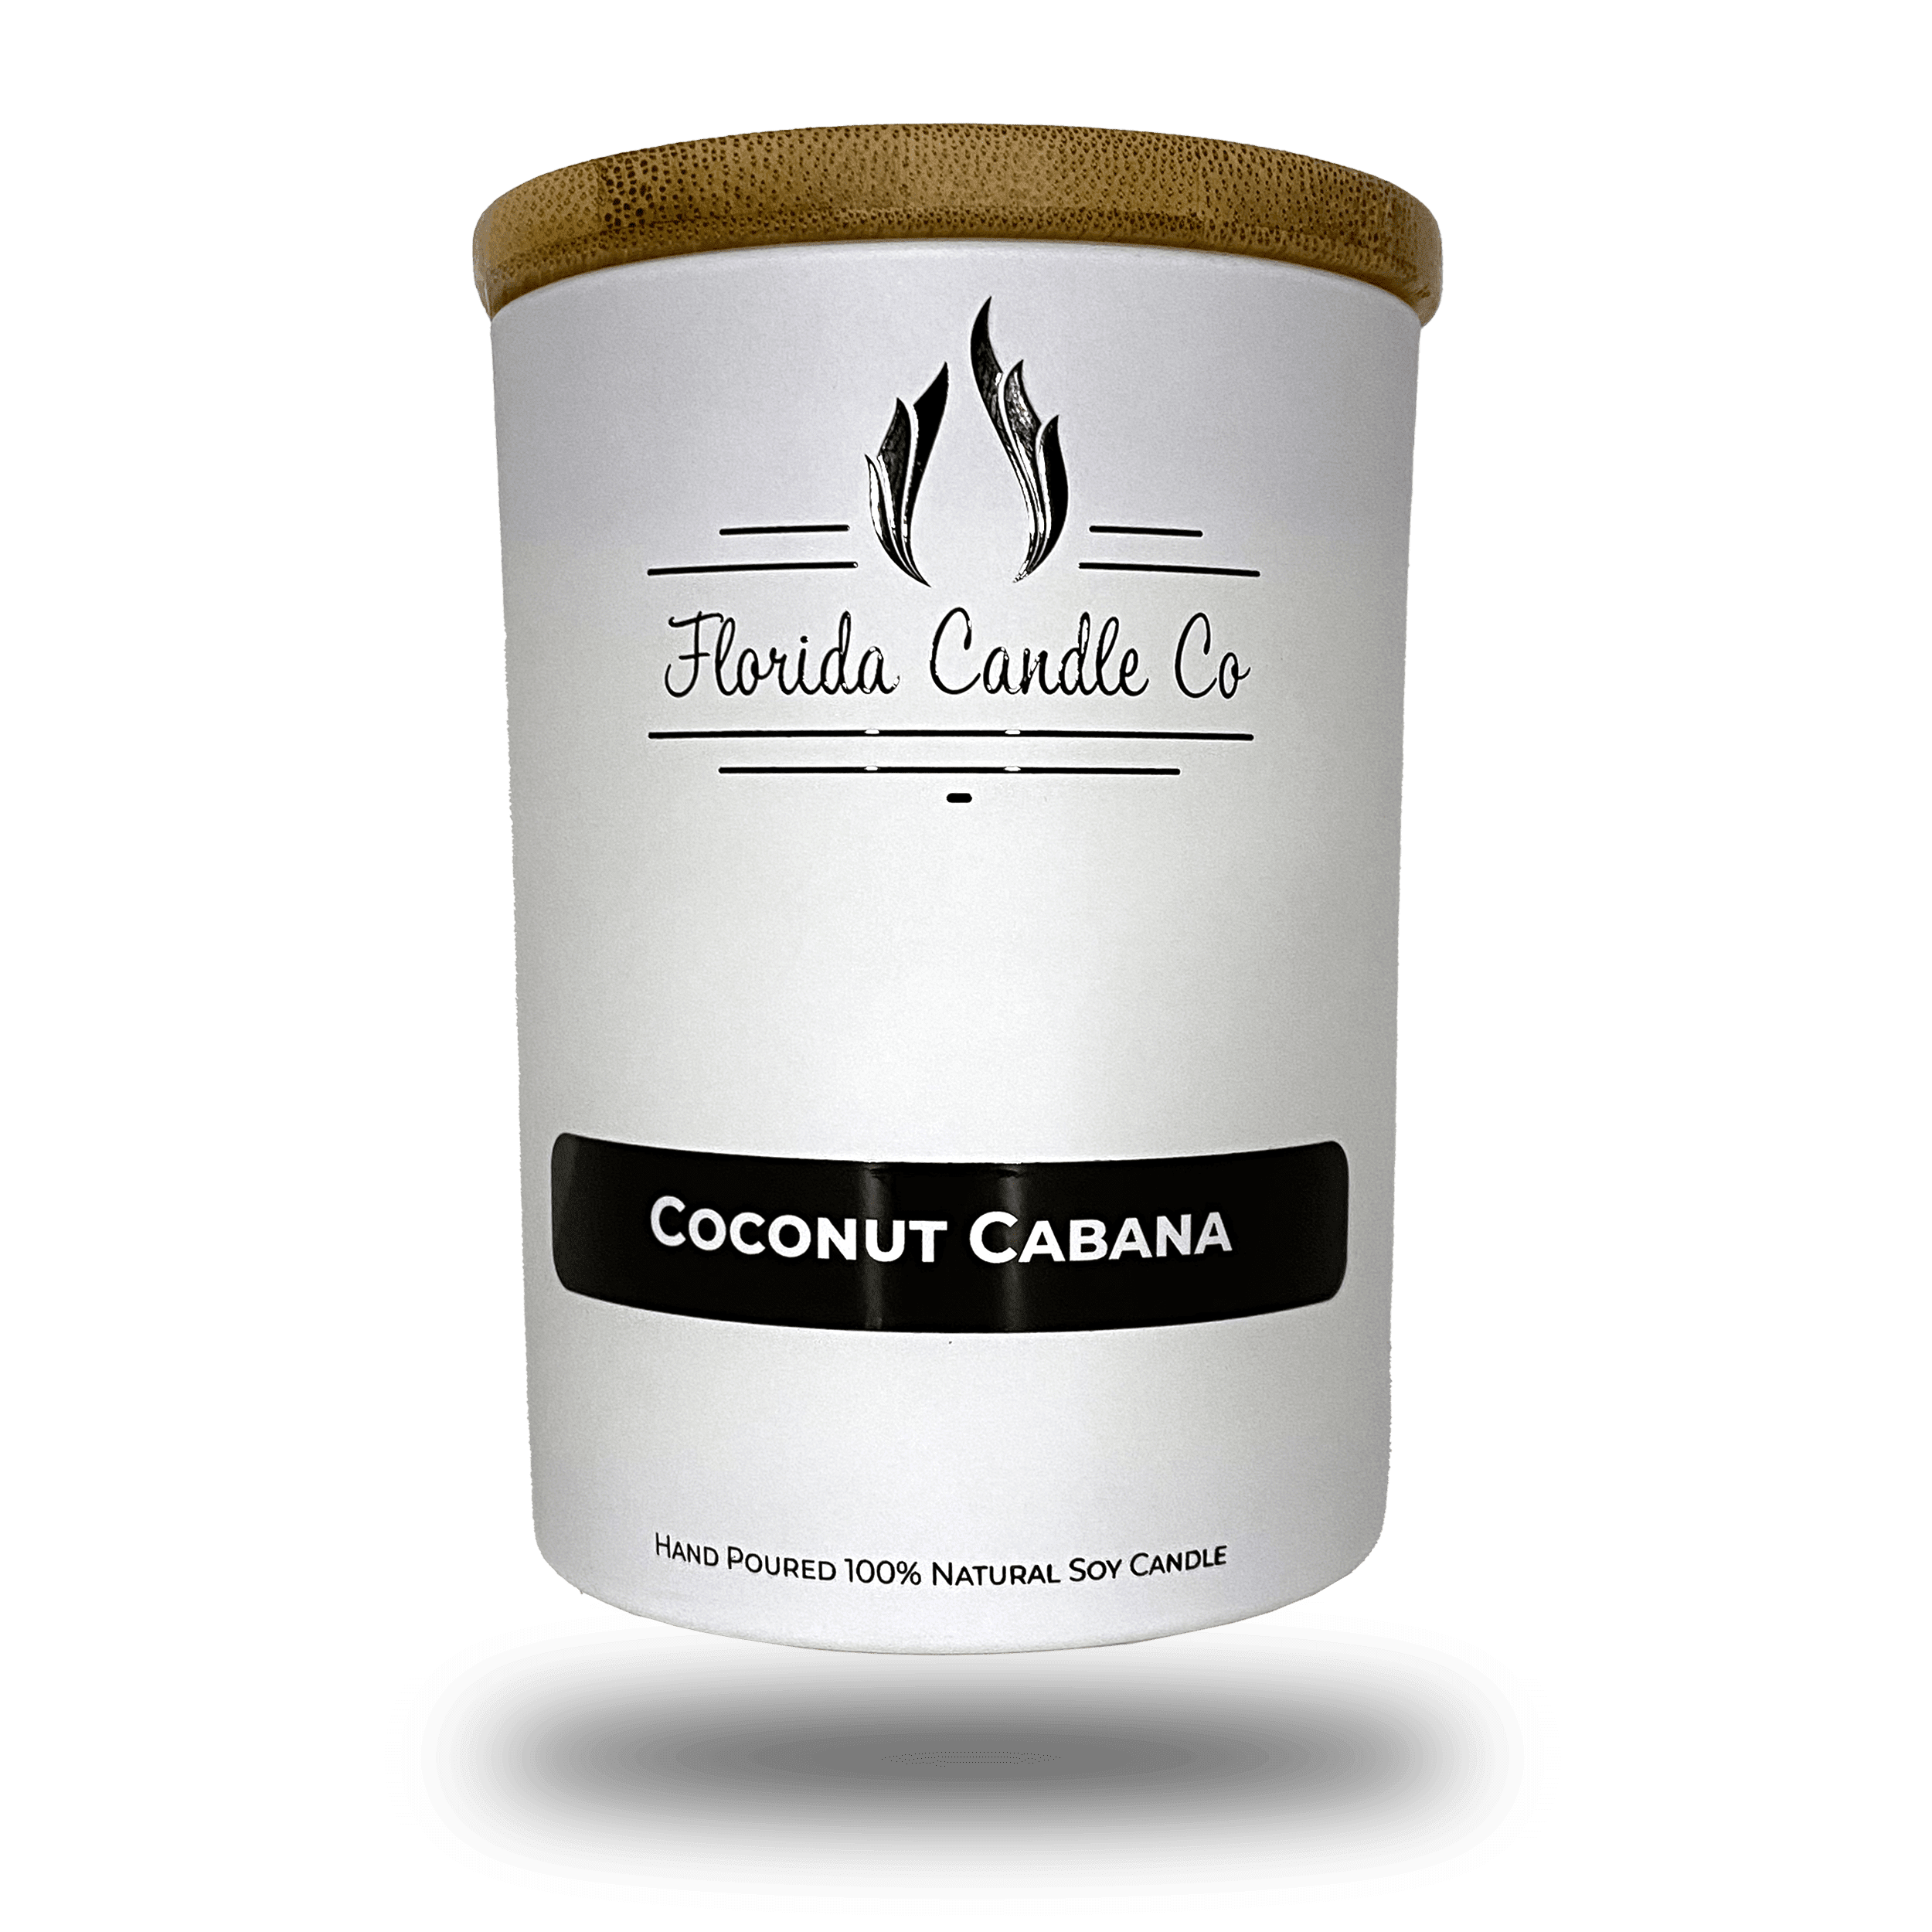 Featured Image for Coconut Cabana Candle